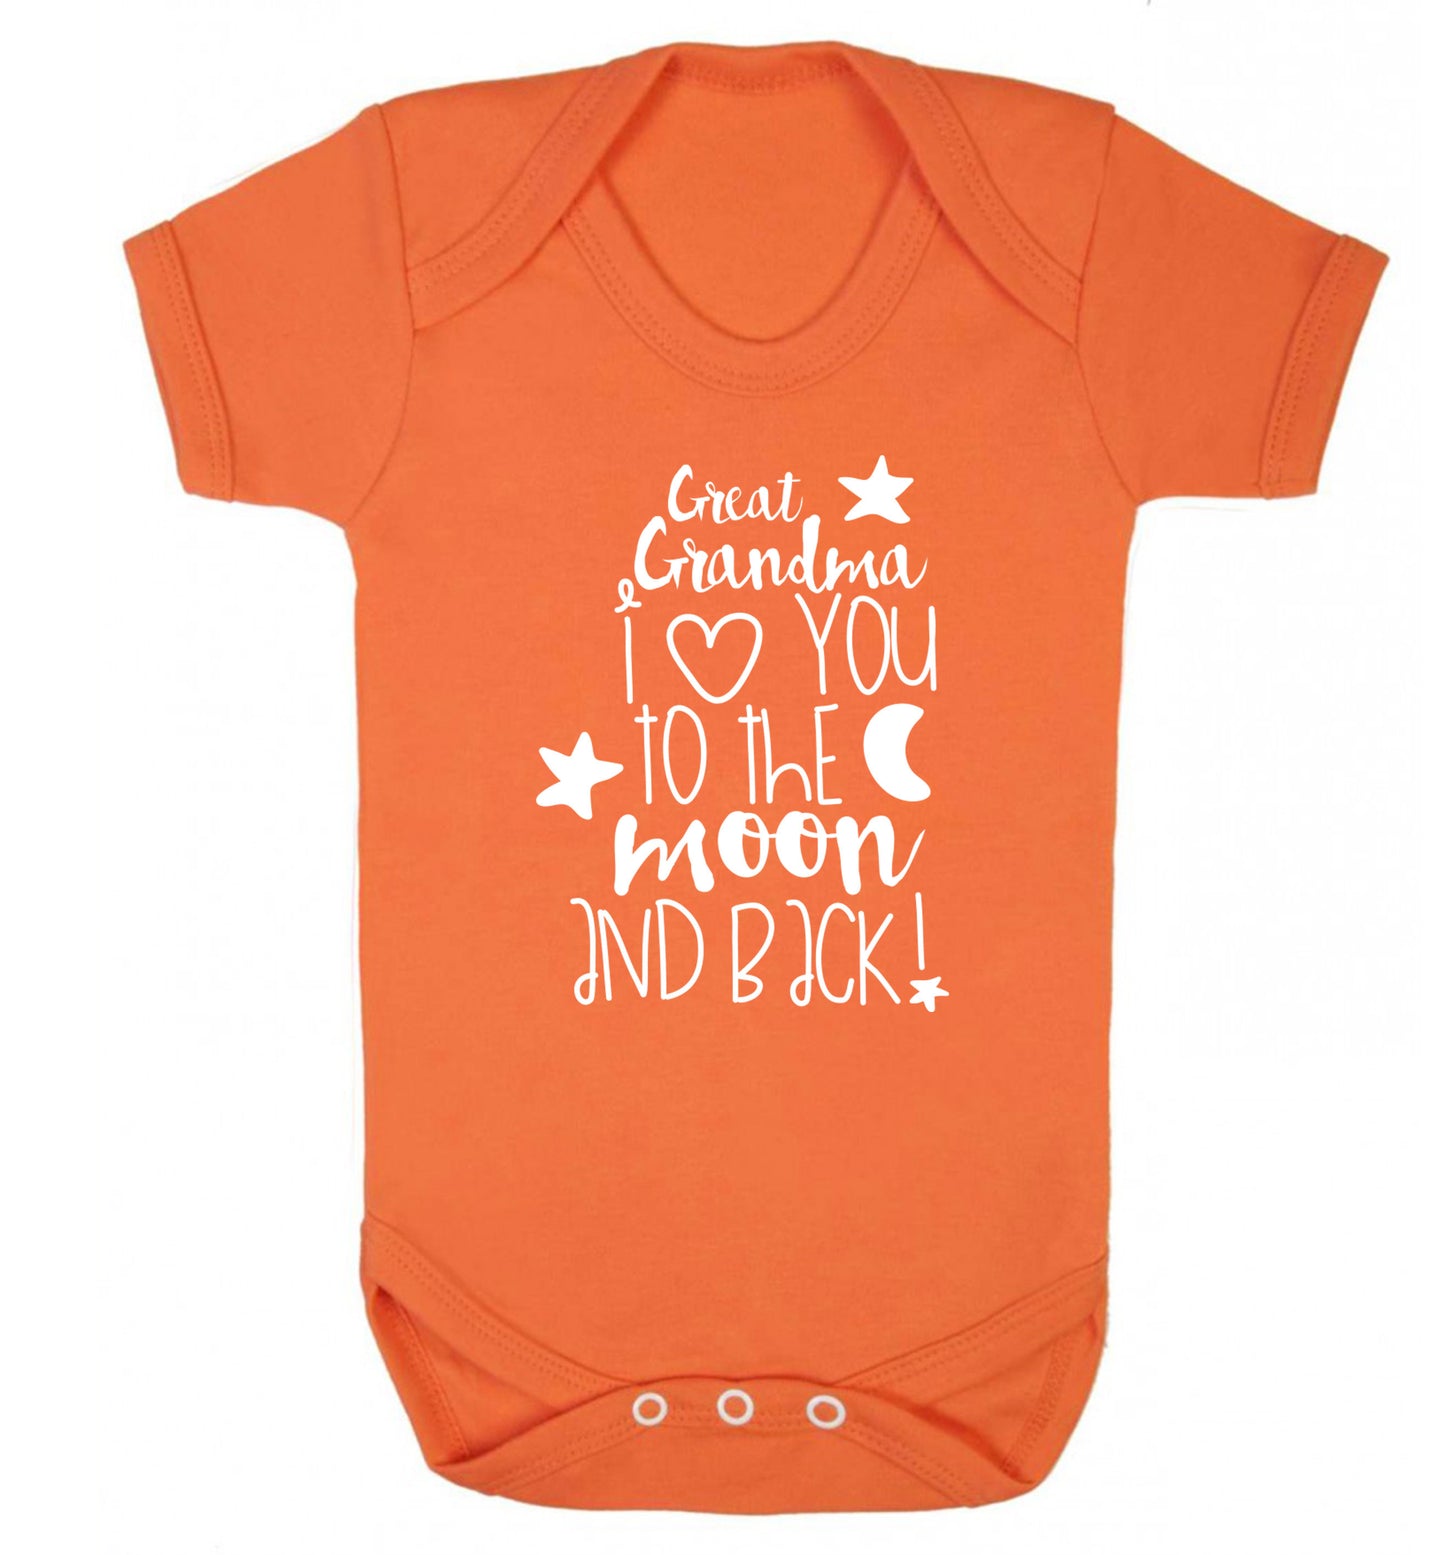 Great Grandma I love you to the moon and back Baby Vest orange 18-24 months